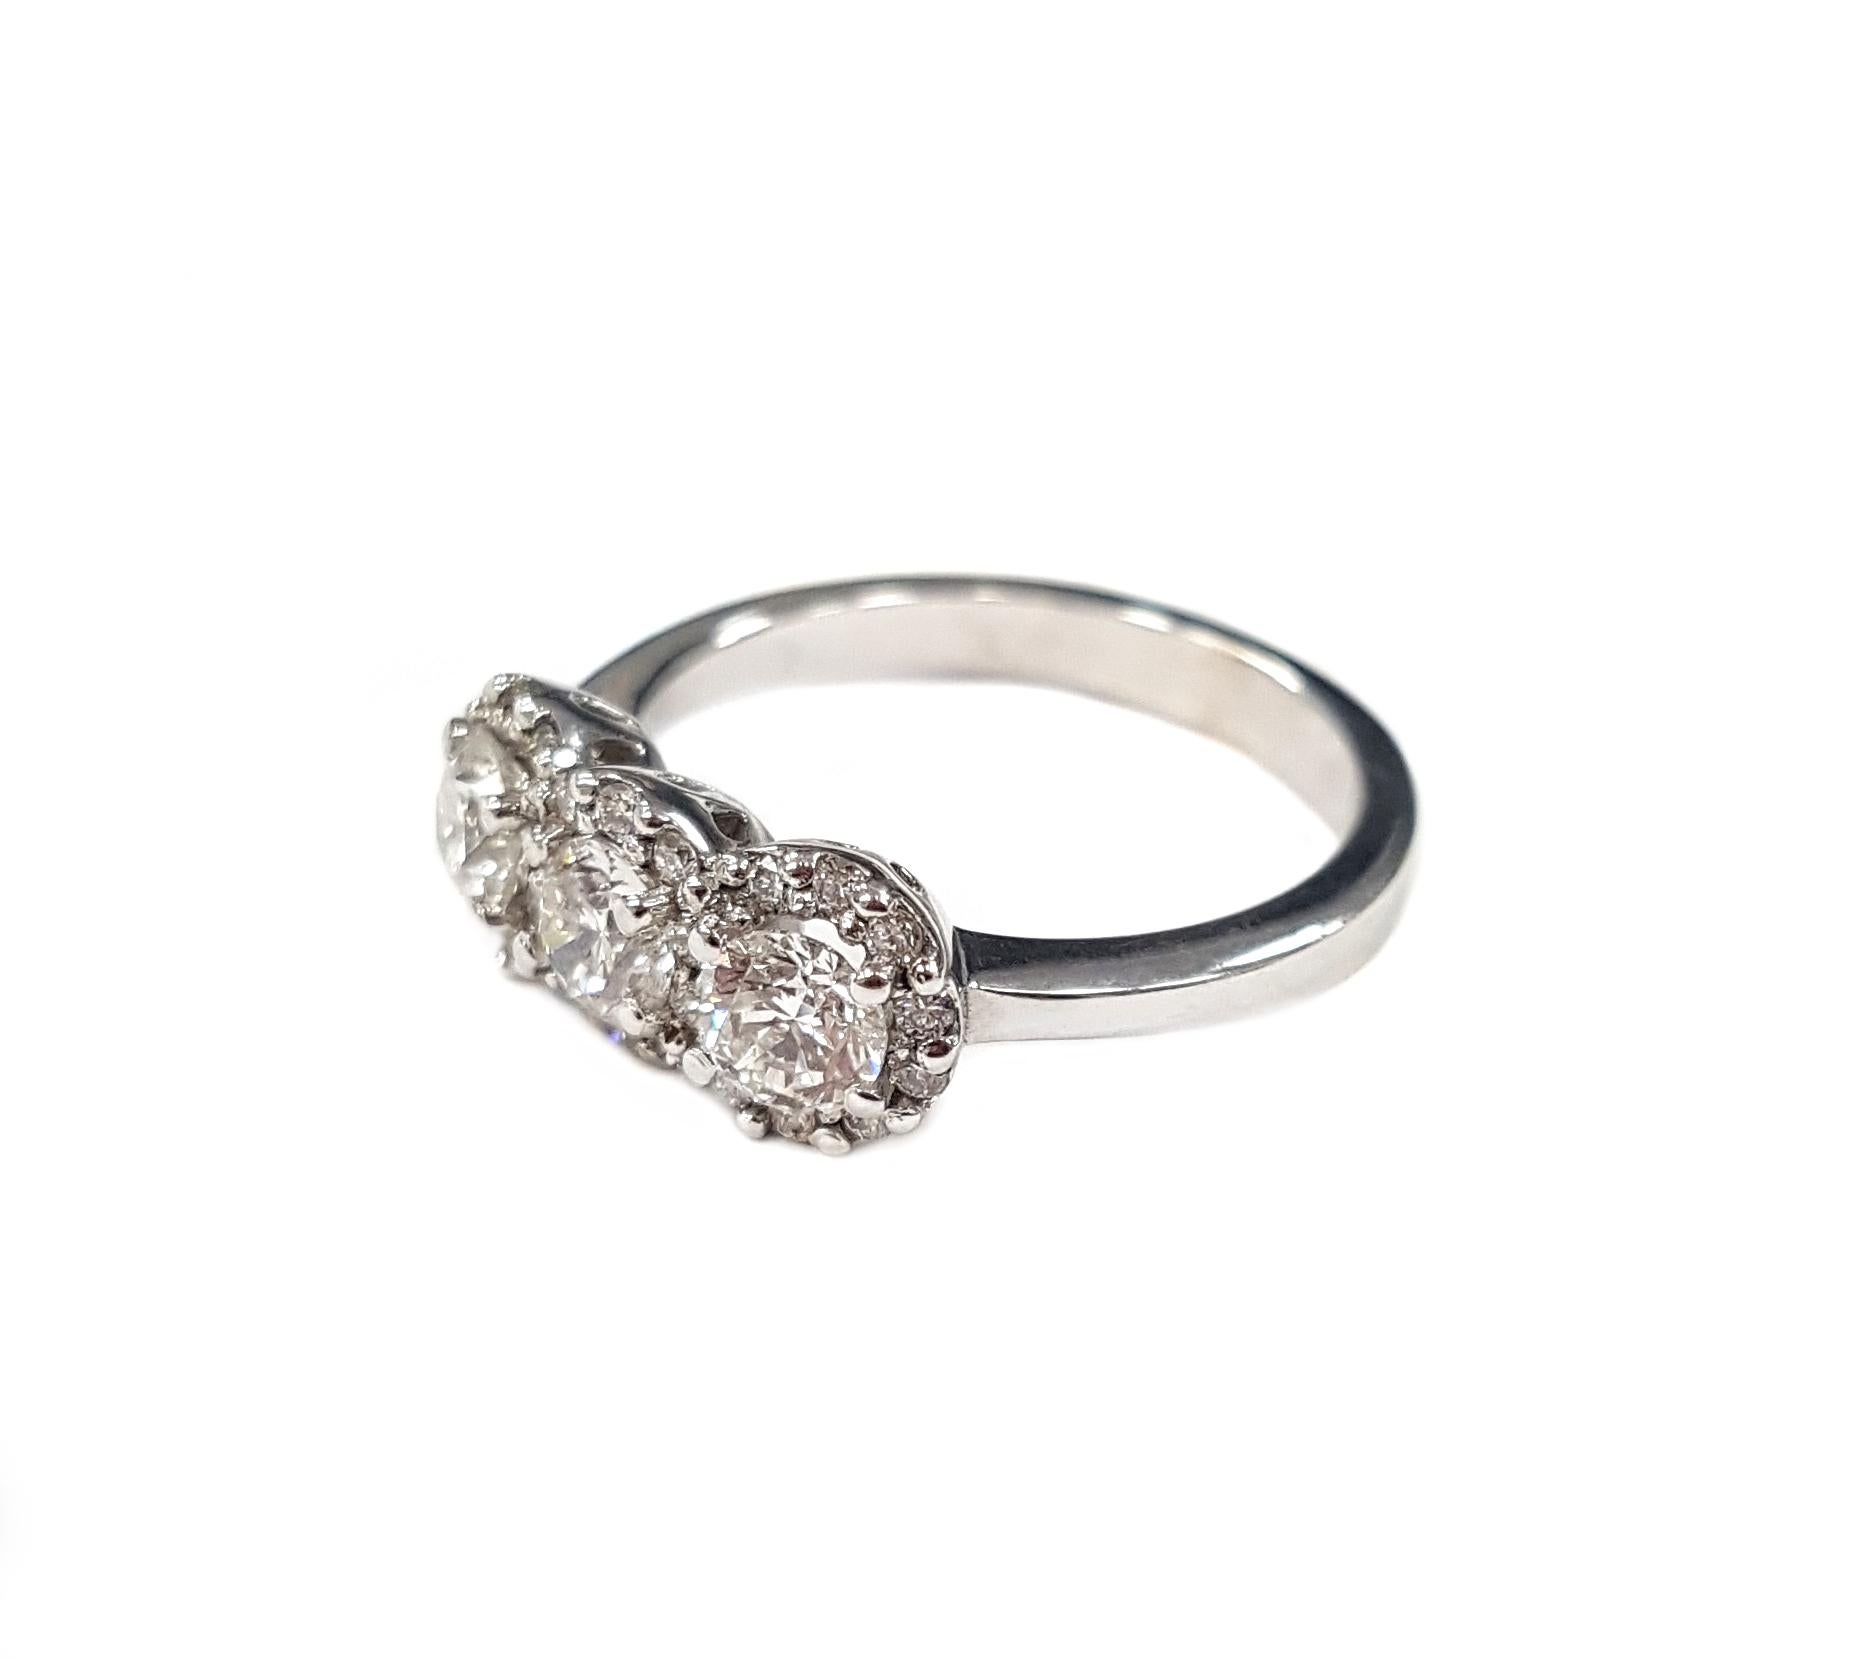 Sparkling perfection, instant heirloom: this ring's three stunning central round-cut white diamonds, each has a single halo of smaller white diamonds surrounding it (1.13 carats total). 

The photographed ring is a 12.5 EU/6.5 US ring size but it